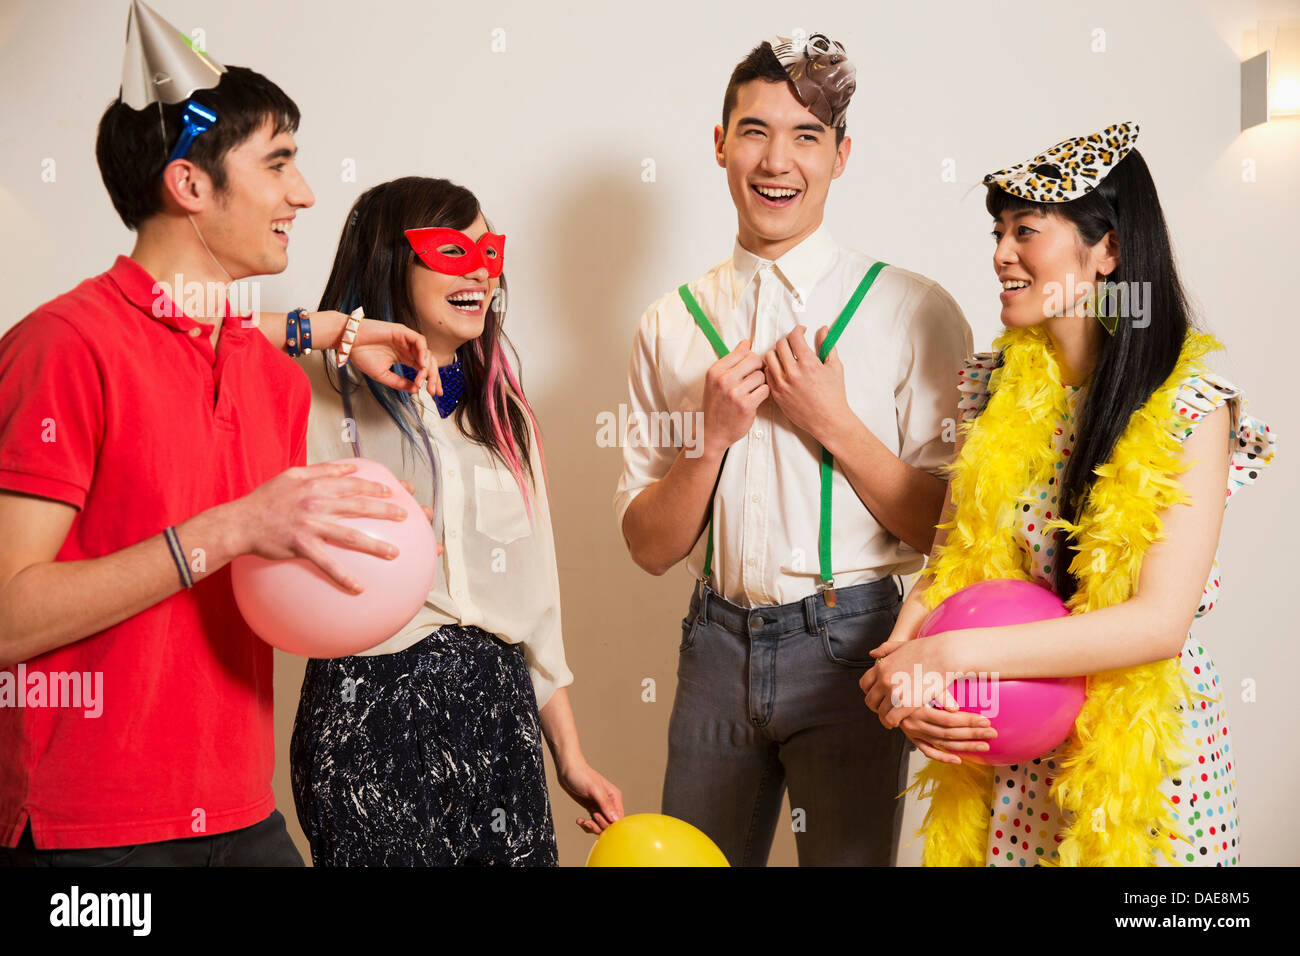 Friends at a party with balloons, studio shot Stock Photo